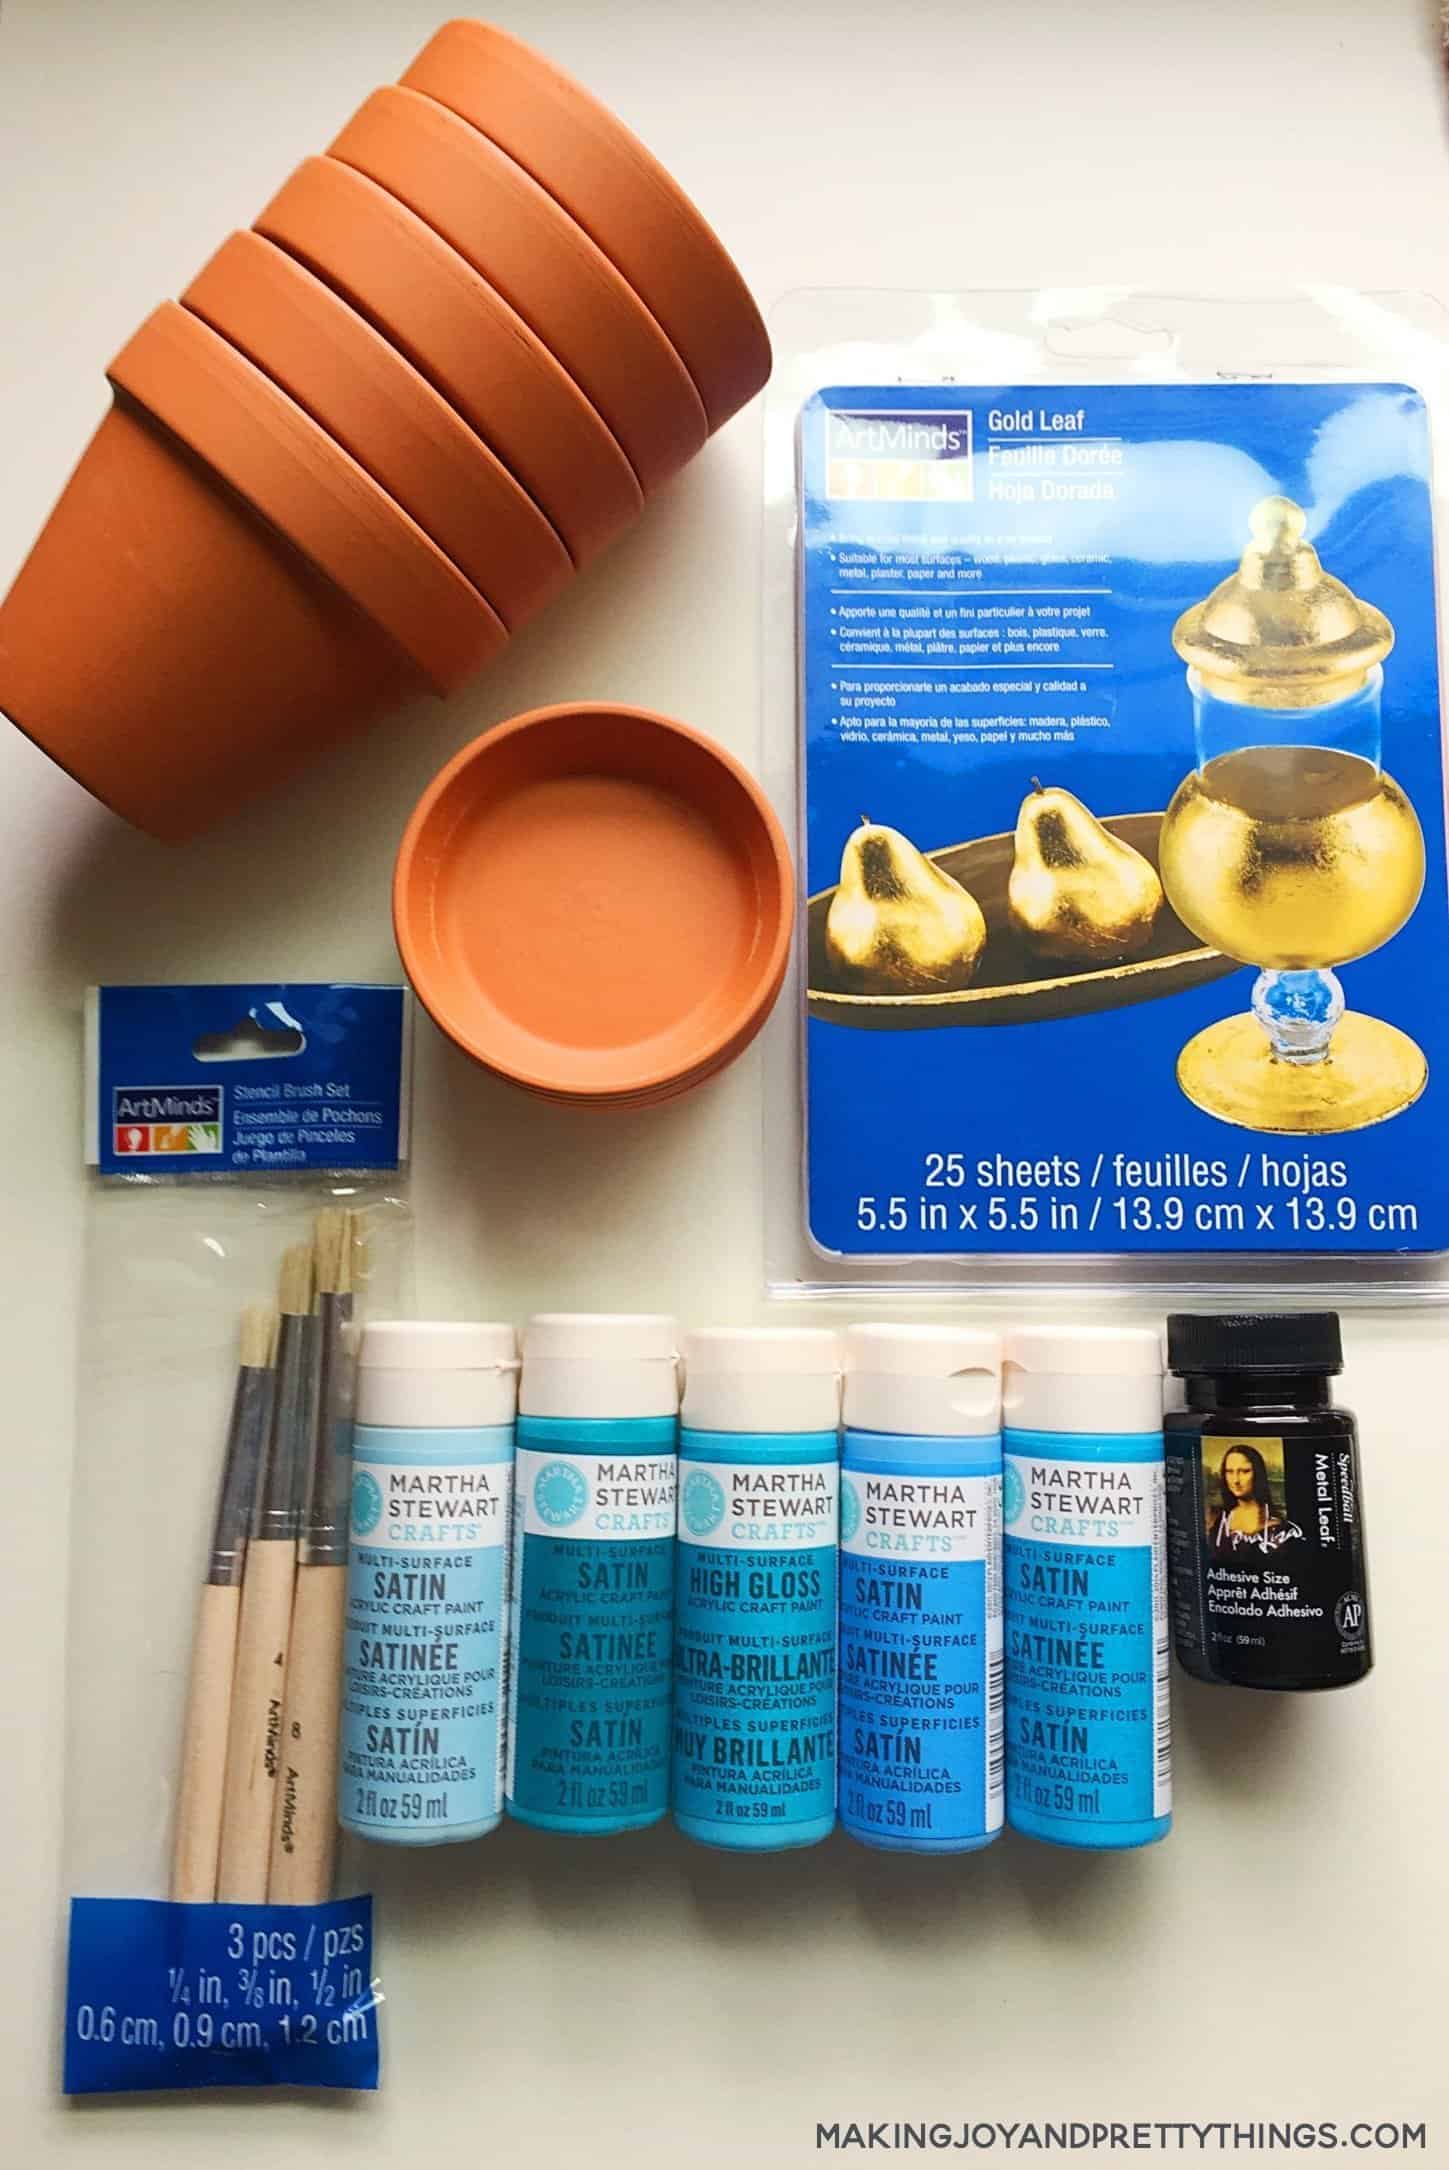 Supplies for gold leaf planters painted in blue and transformed clay pots with gold notes applied with a spray adhesive